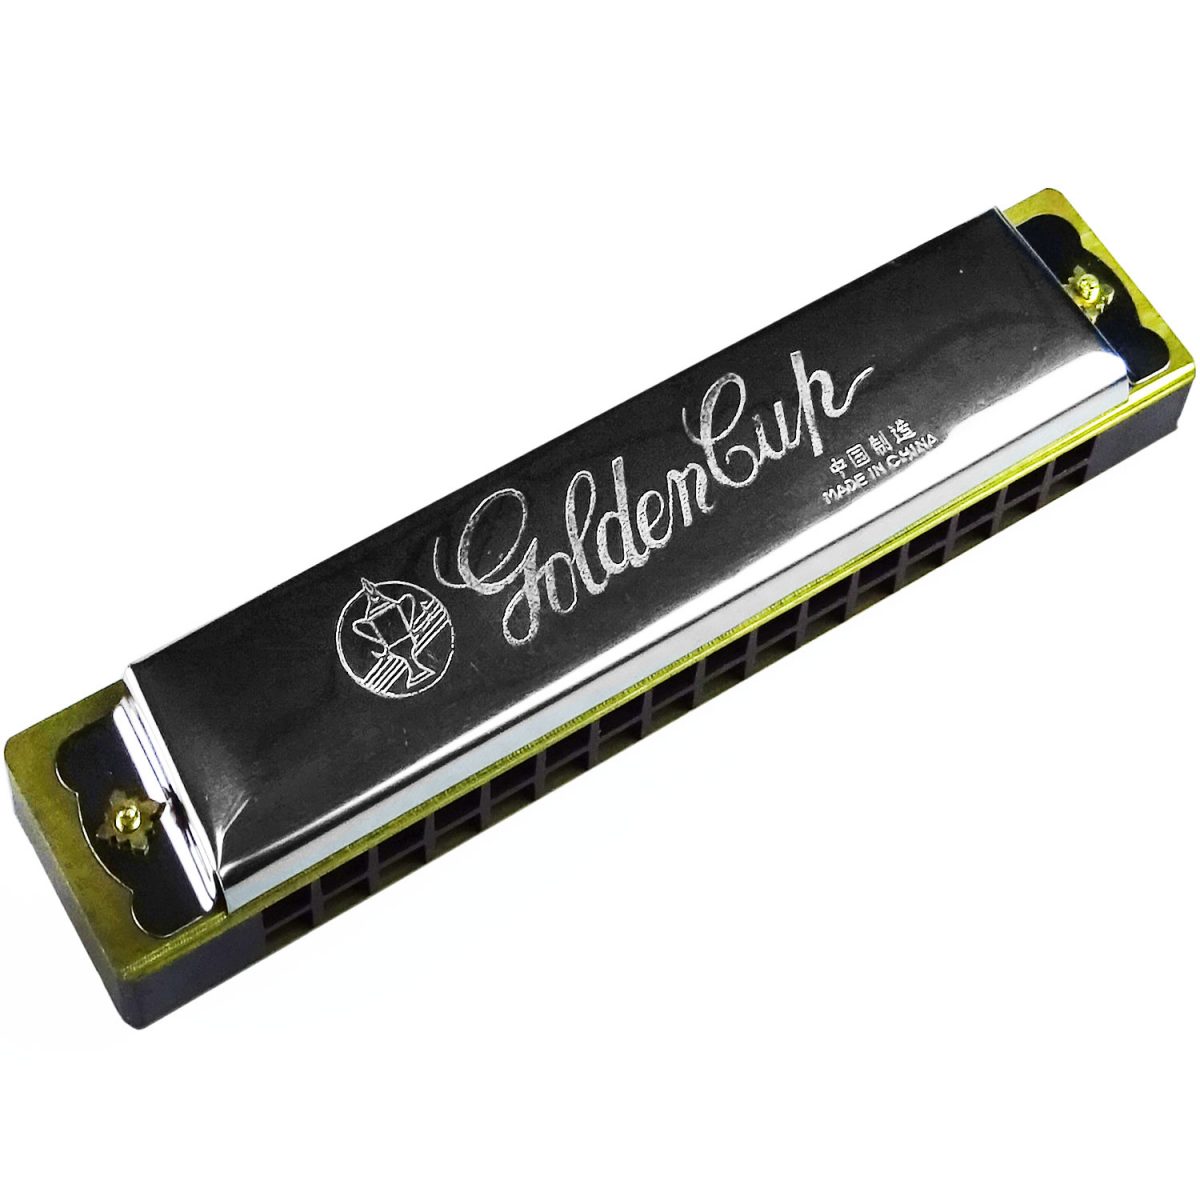 golden-cup-harmonica-jh016n front